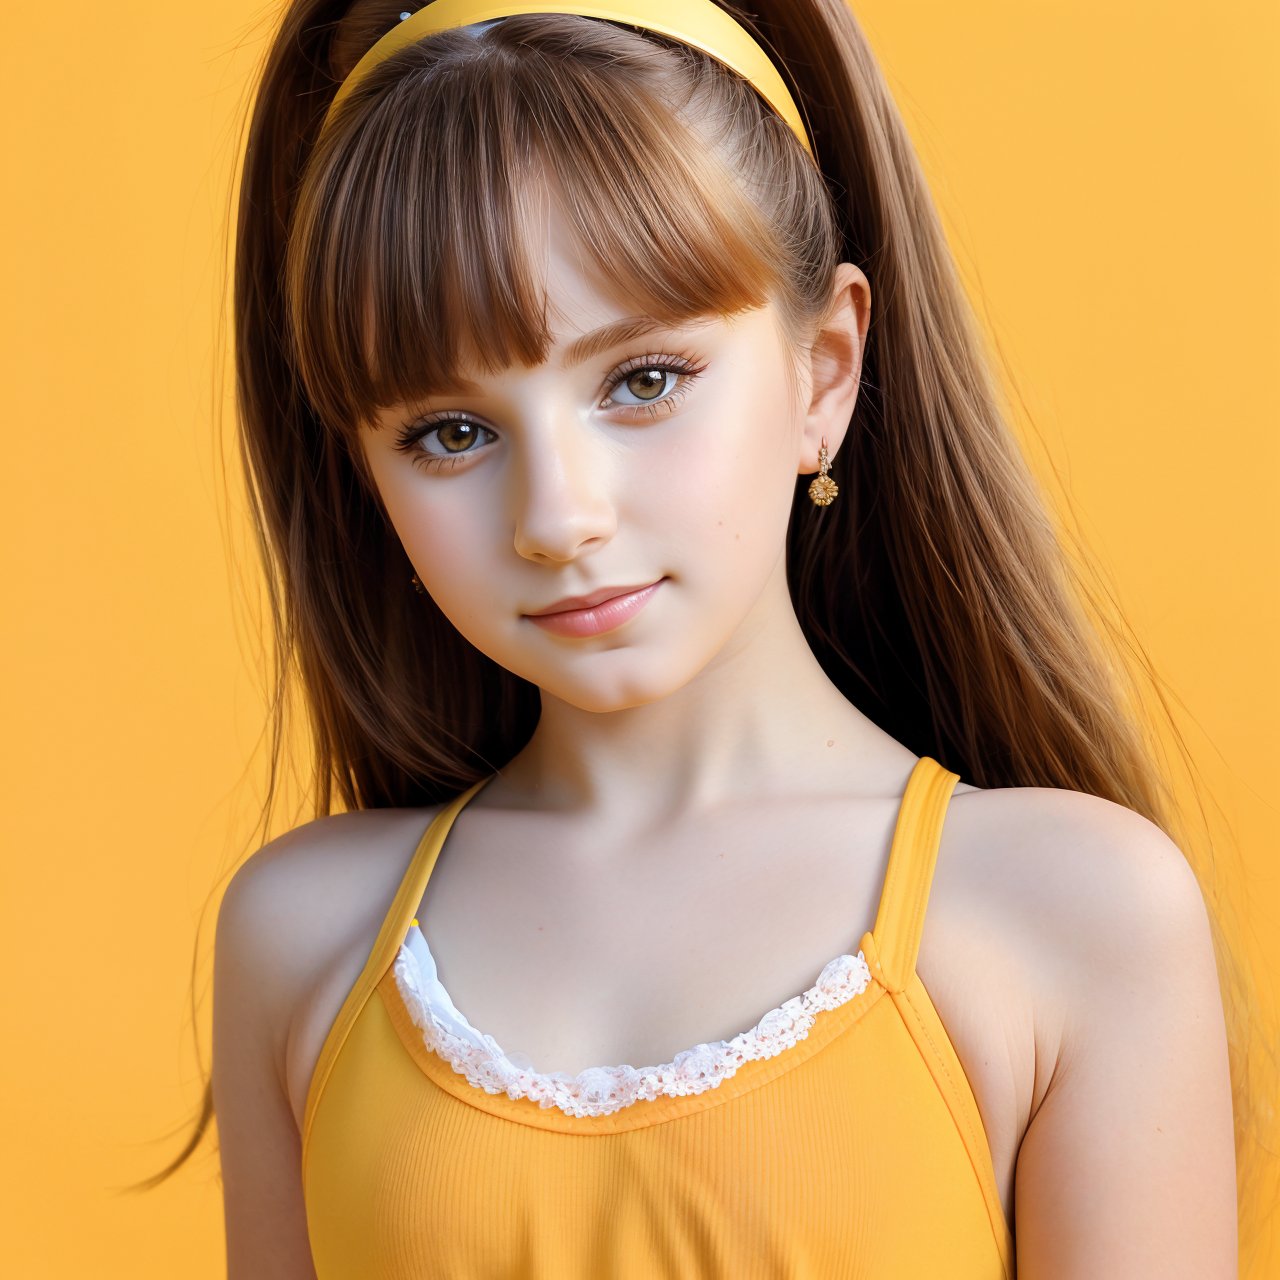 SFW, (masterpiece:1.3), extra resolution, distant short, full body portrait of adorable (AIDA_LoRA_KtM:1.09) <lora:AIDA_LoRA_KtM:0.83> wearing sportive uniform and posing for a picture on blurry yellow background, young girl, pretty face, self-assurance, hyper realistic, studio photo, kkw-ph1, hdr, f1.7